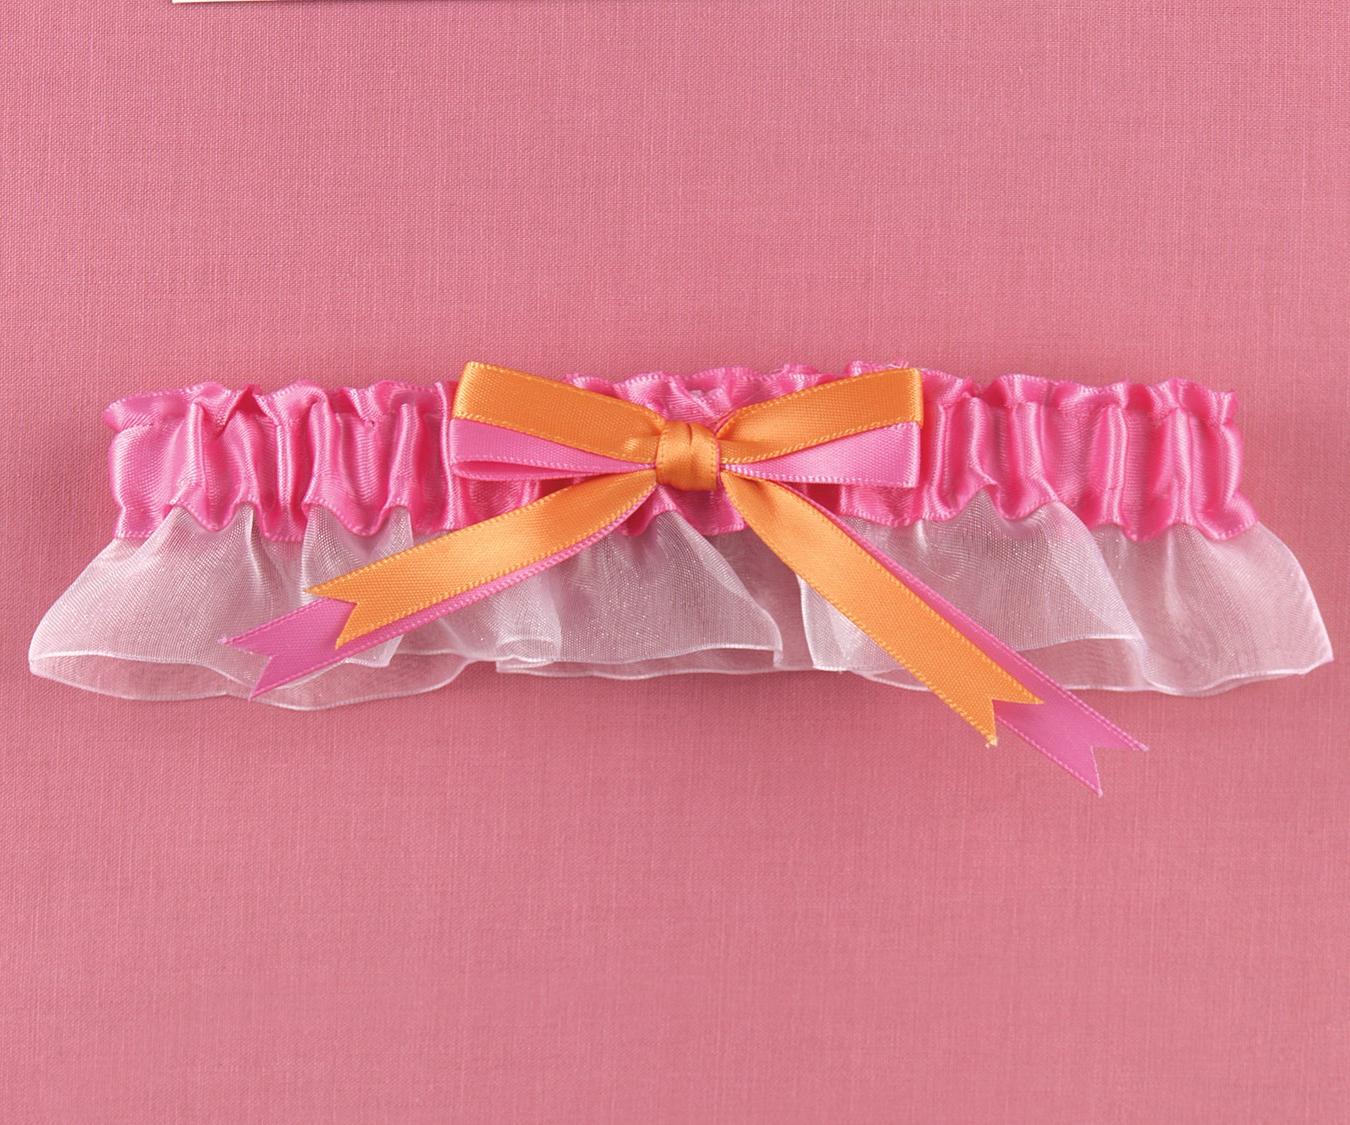 Fuchsia & Orange Darling Duo Garter. Double click on above image to view